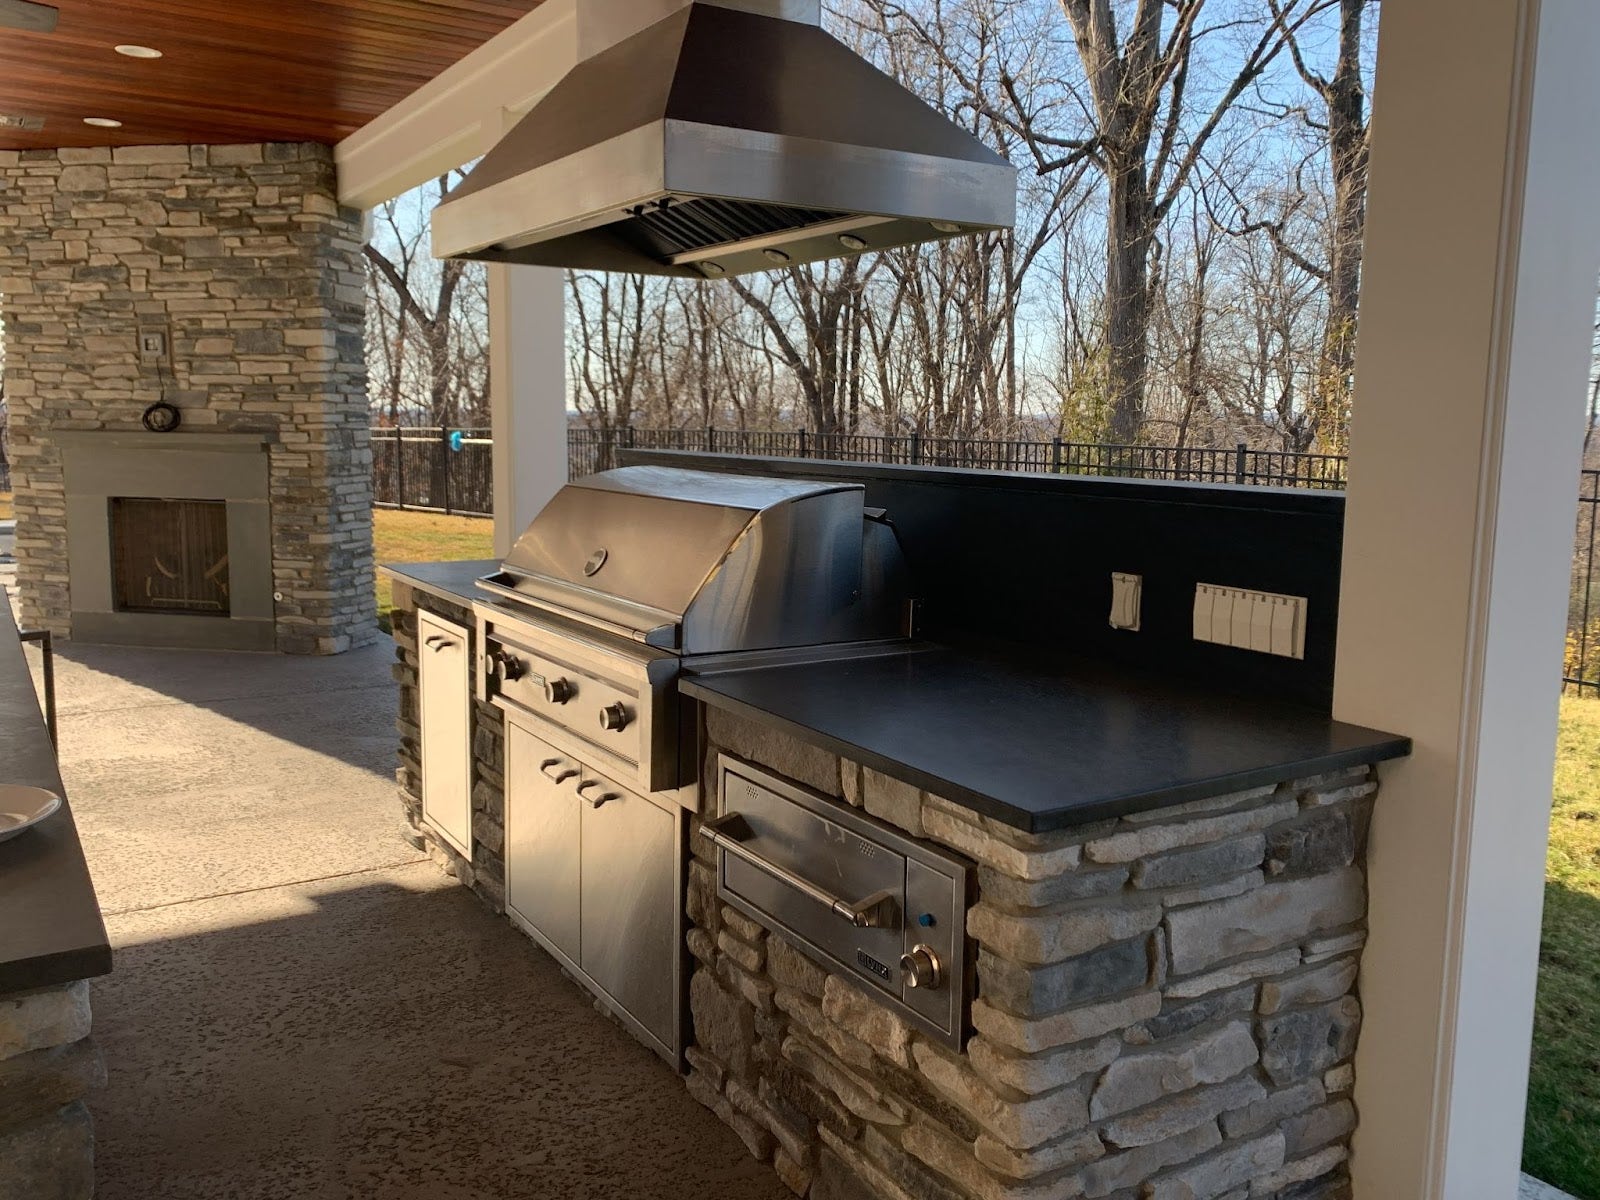 Elegant stone-clad outdoor cooking space with a professional stainless steel grill and matching ventilation system, adjacent to a fireplace.